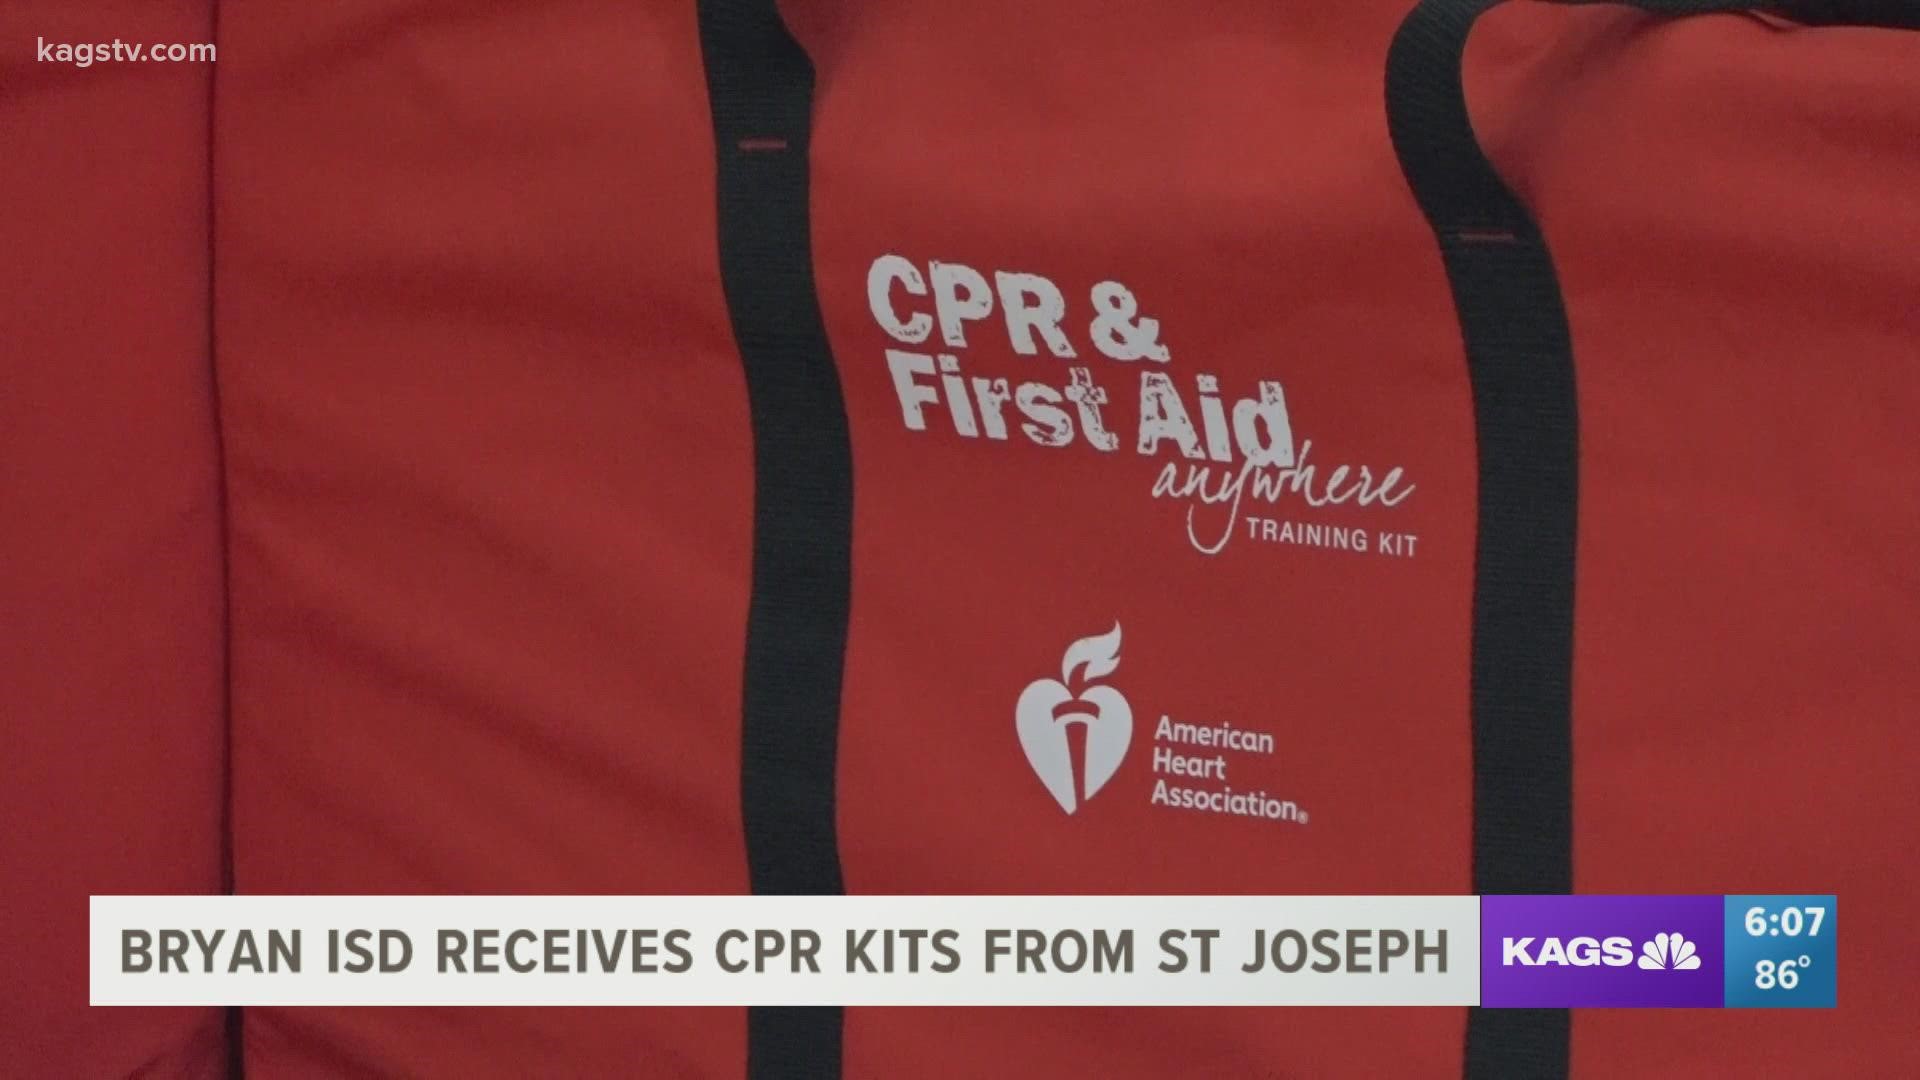 The kits are designed to help students learn CPR, which is a requirement